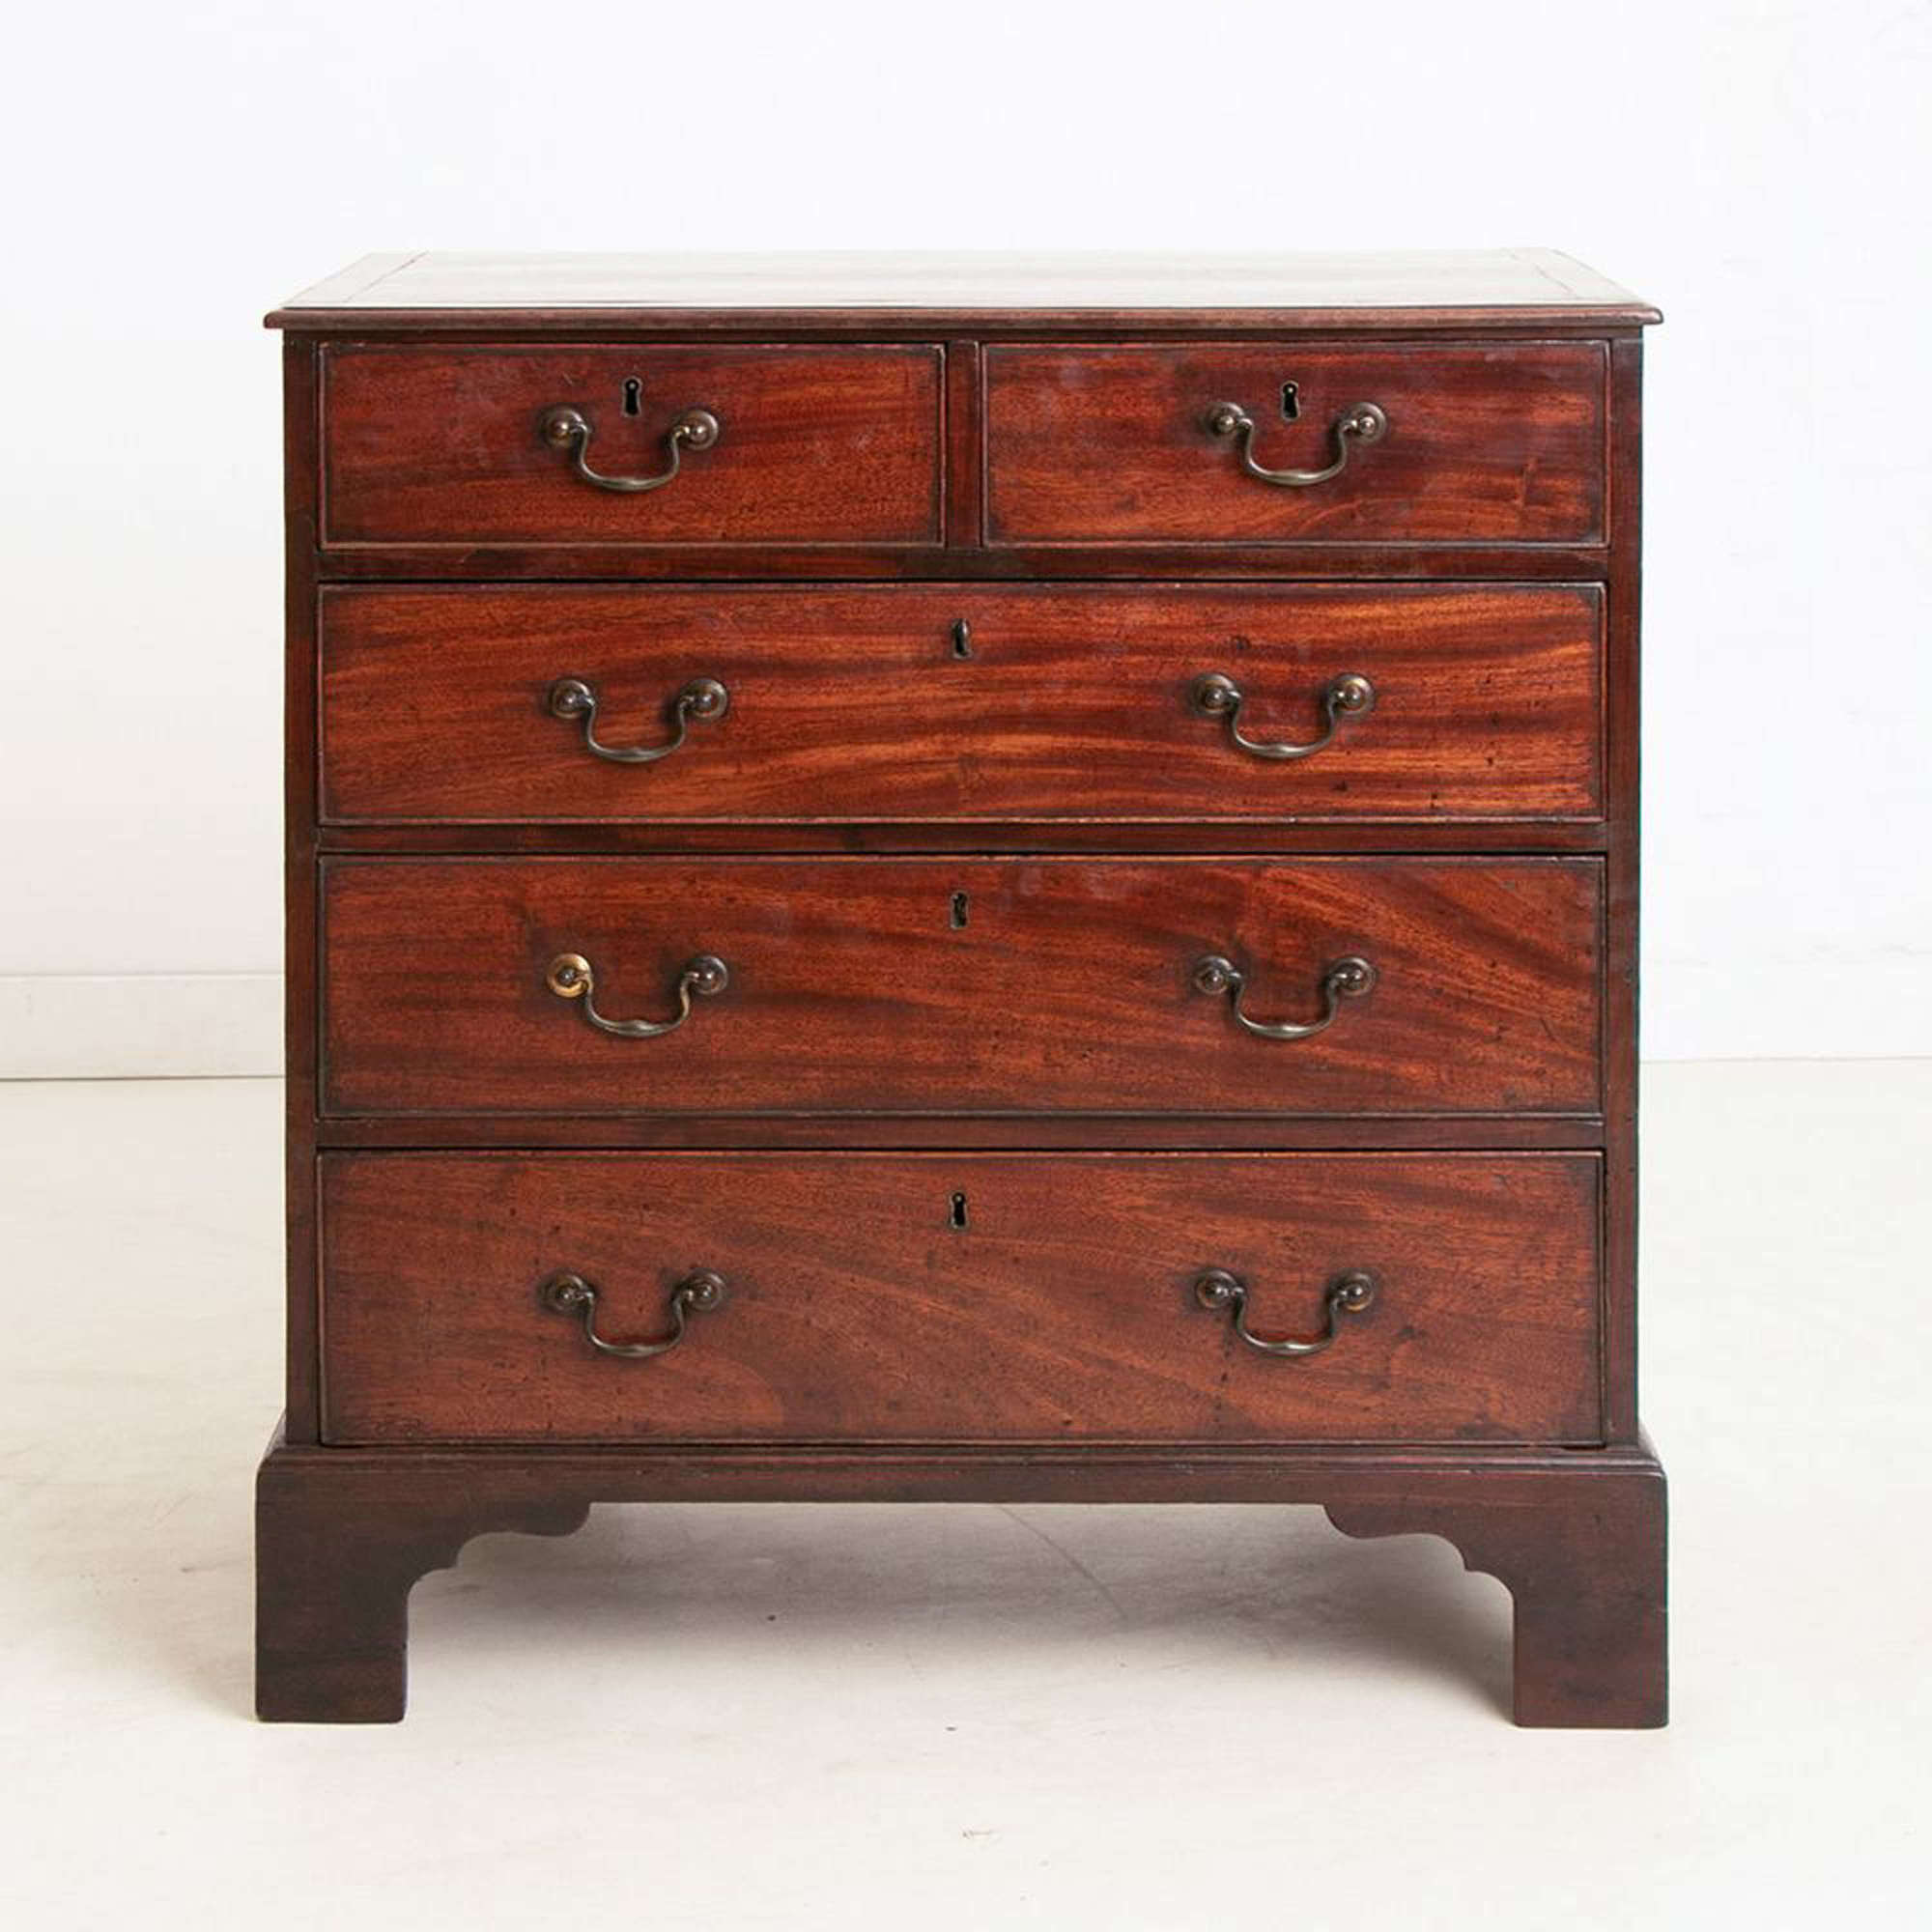 Antique Georgian Mahogany Bachelor's Chest of Drawers c.1810